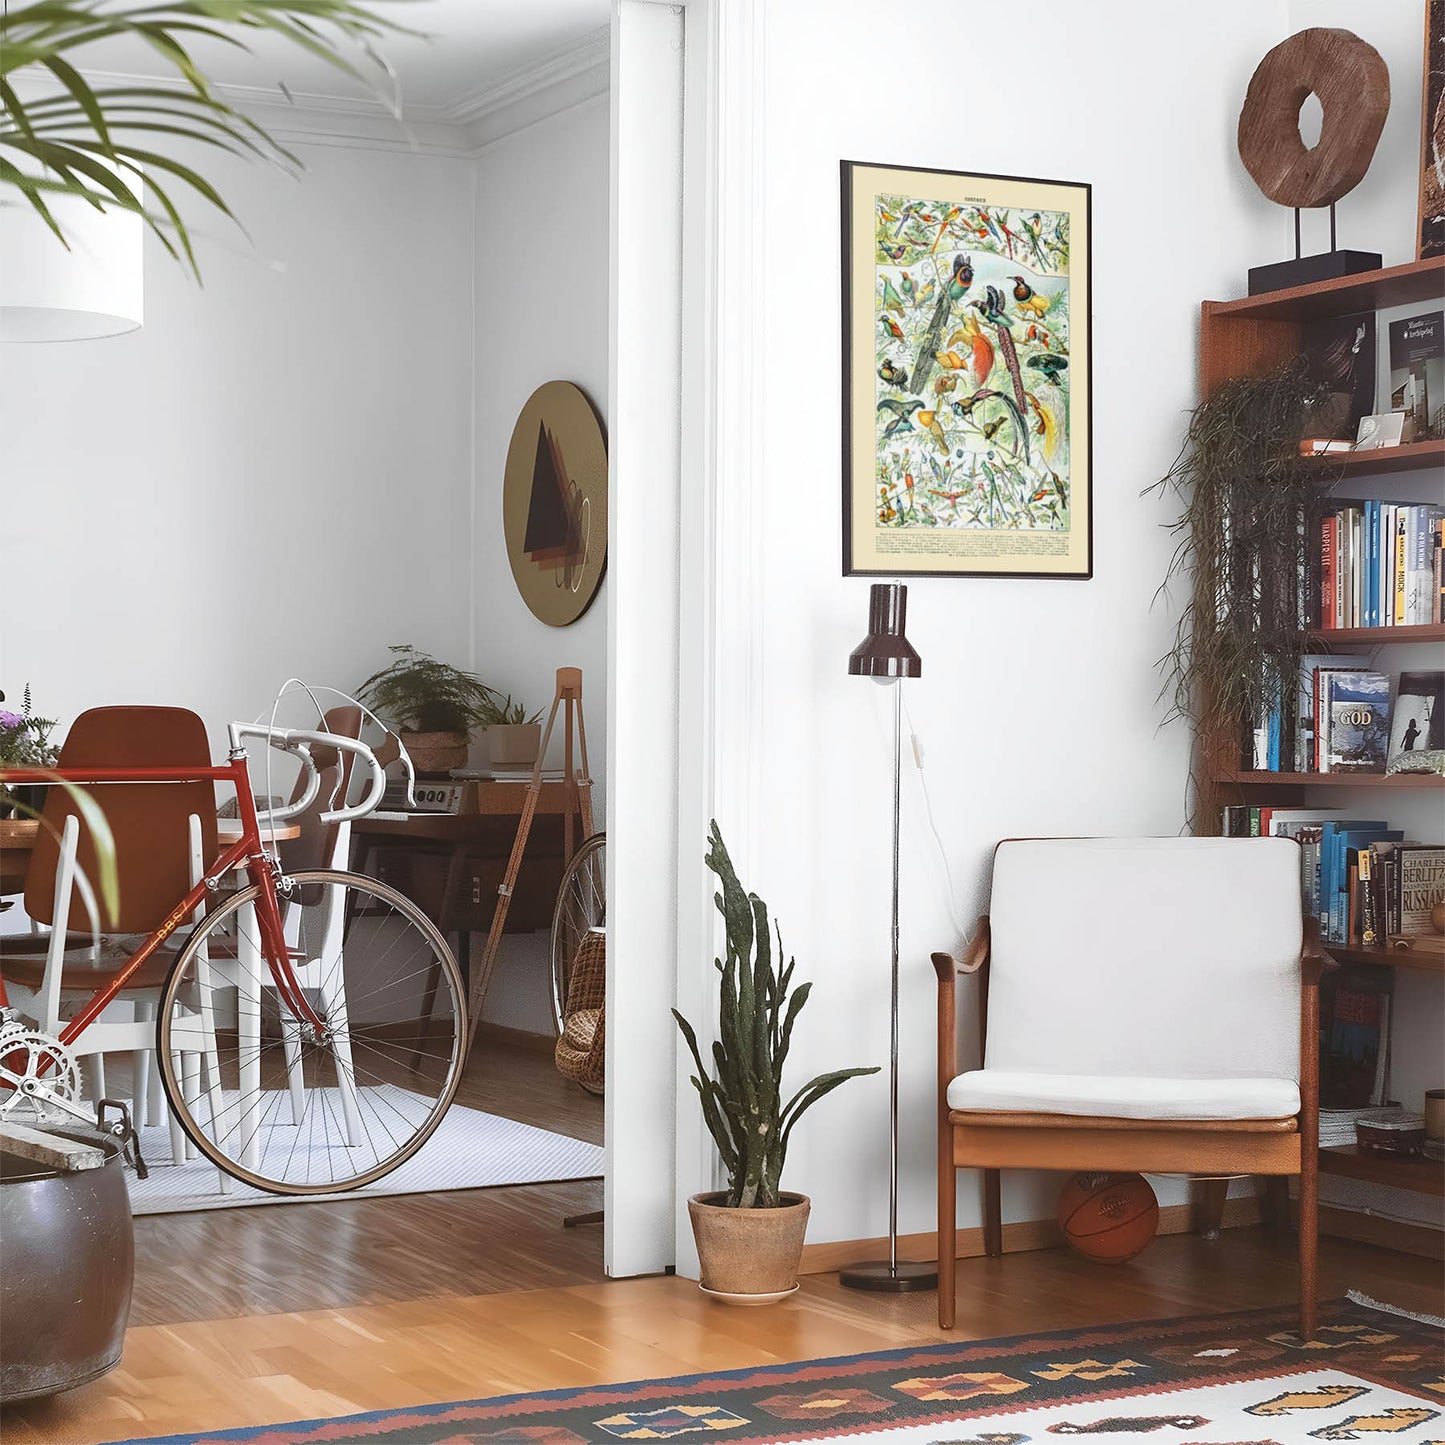 Eclectic living room with a road bike, bookshelf and house plants that features framed artwork of a Exotic Tropical Birds above a chair and lamp